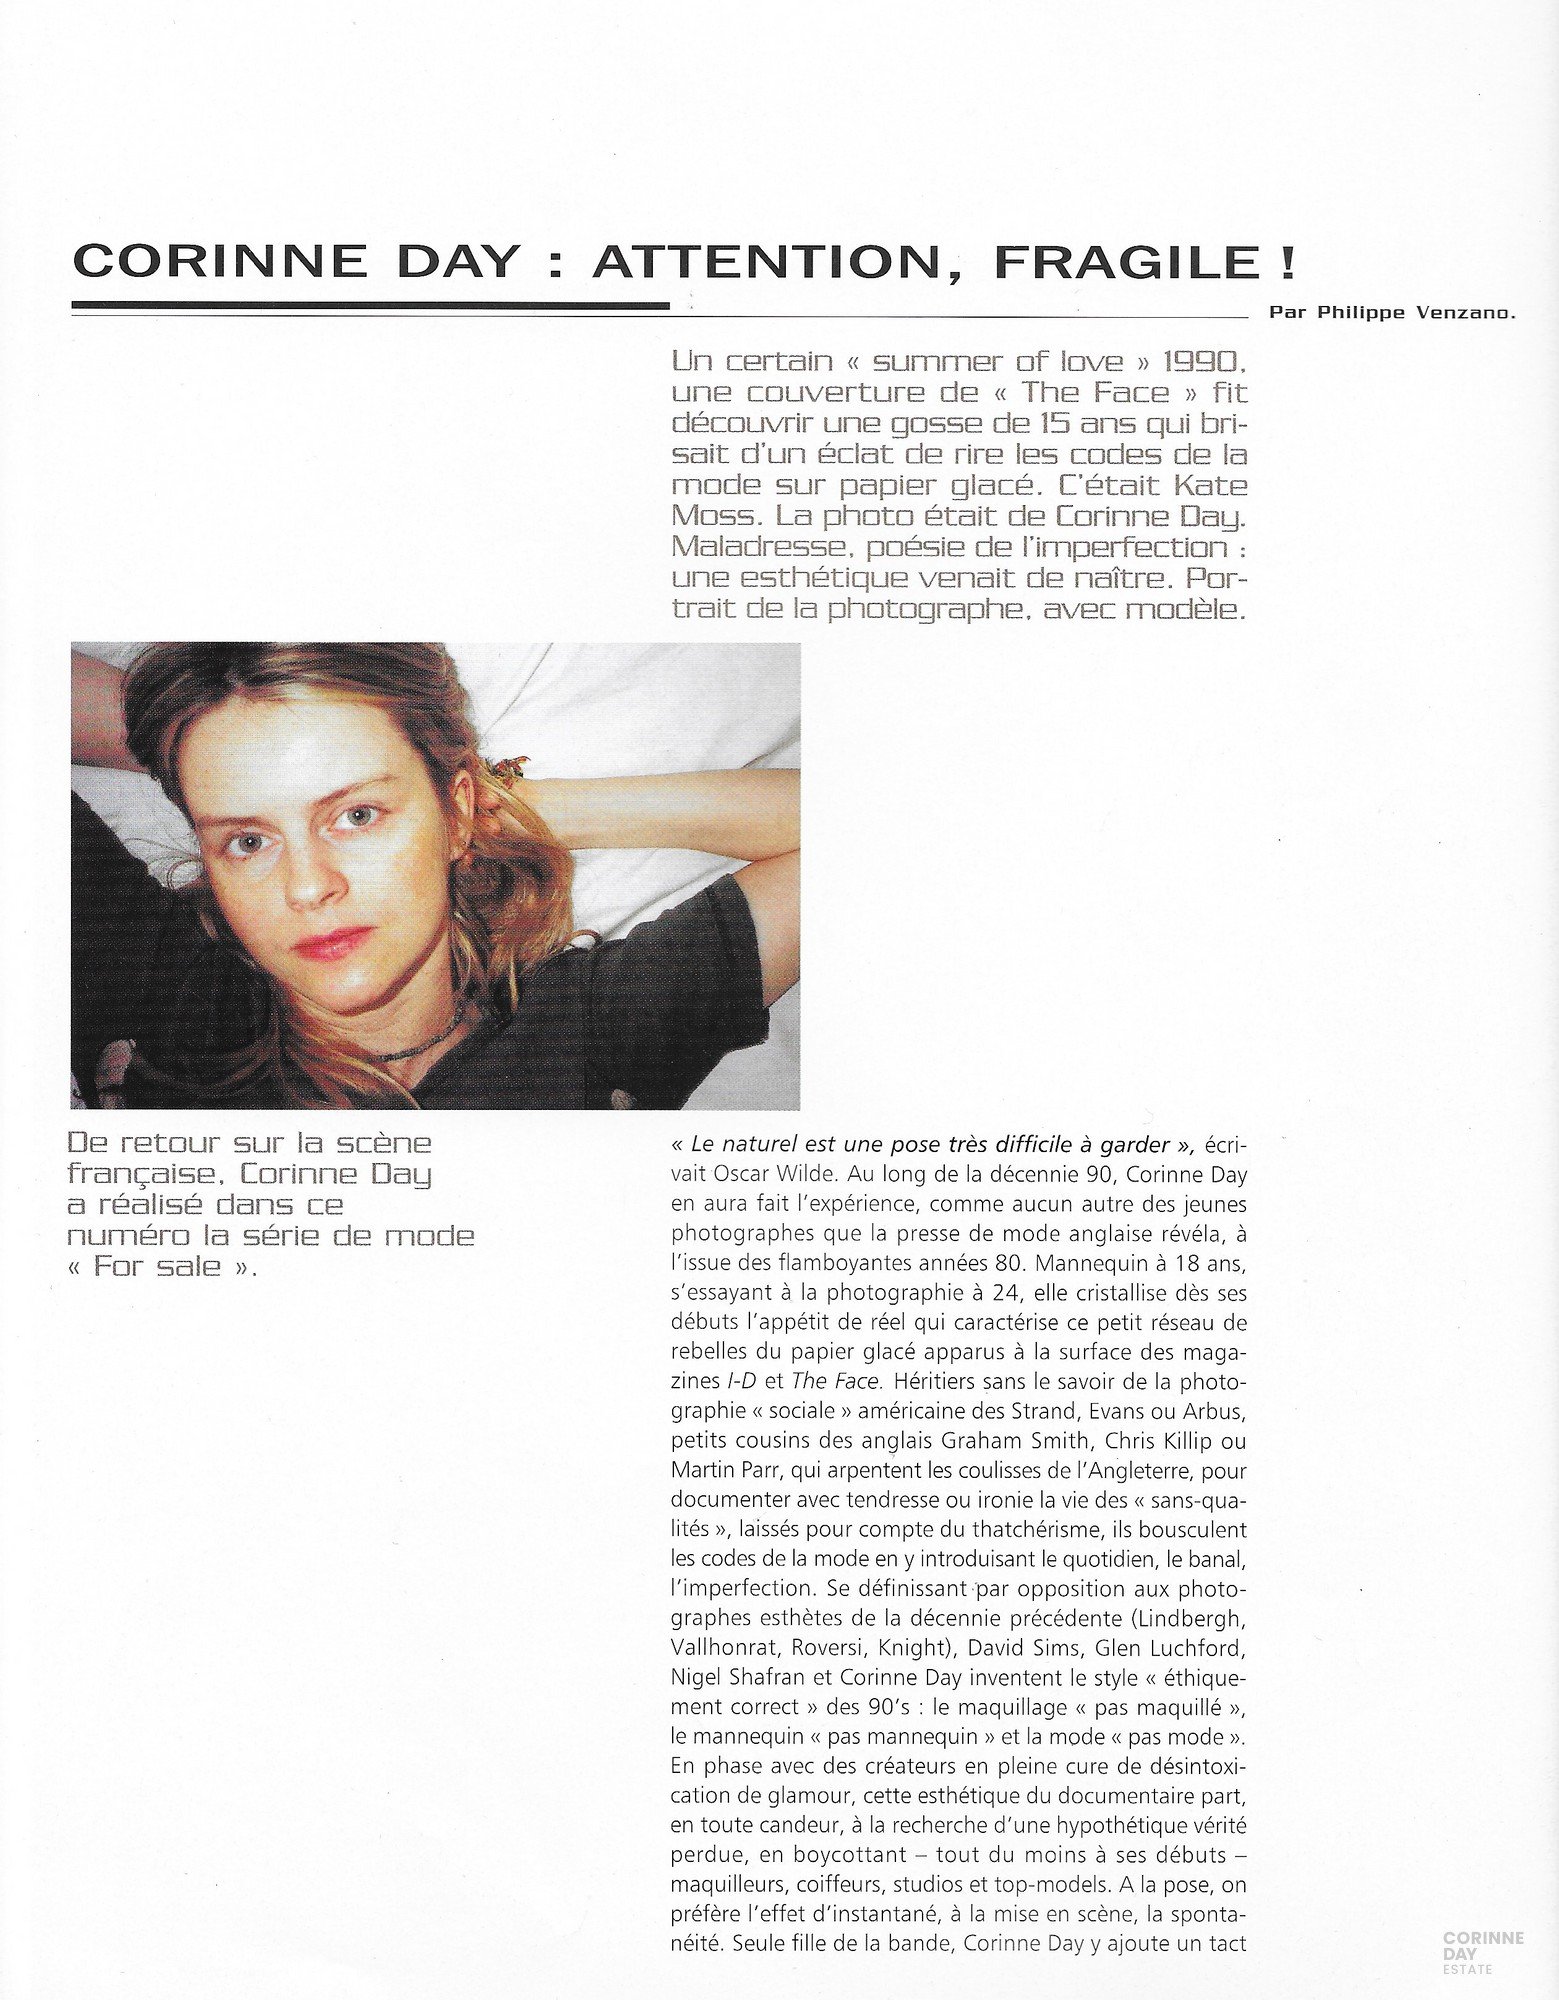 Corinne Day, Attention, Fragile, Mixte, 1 Jun 2000 — Image 2 of 3